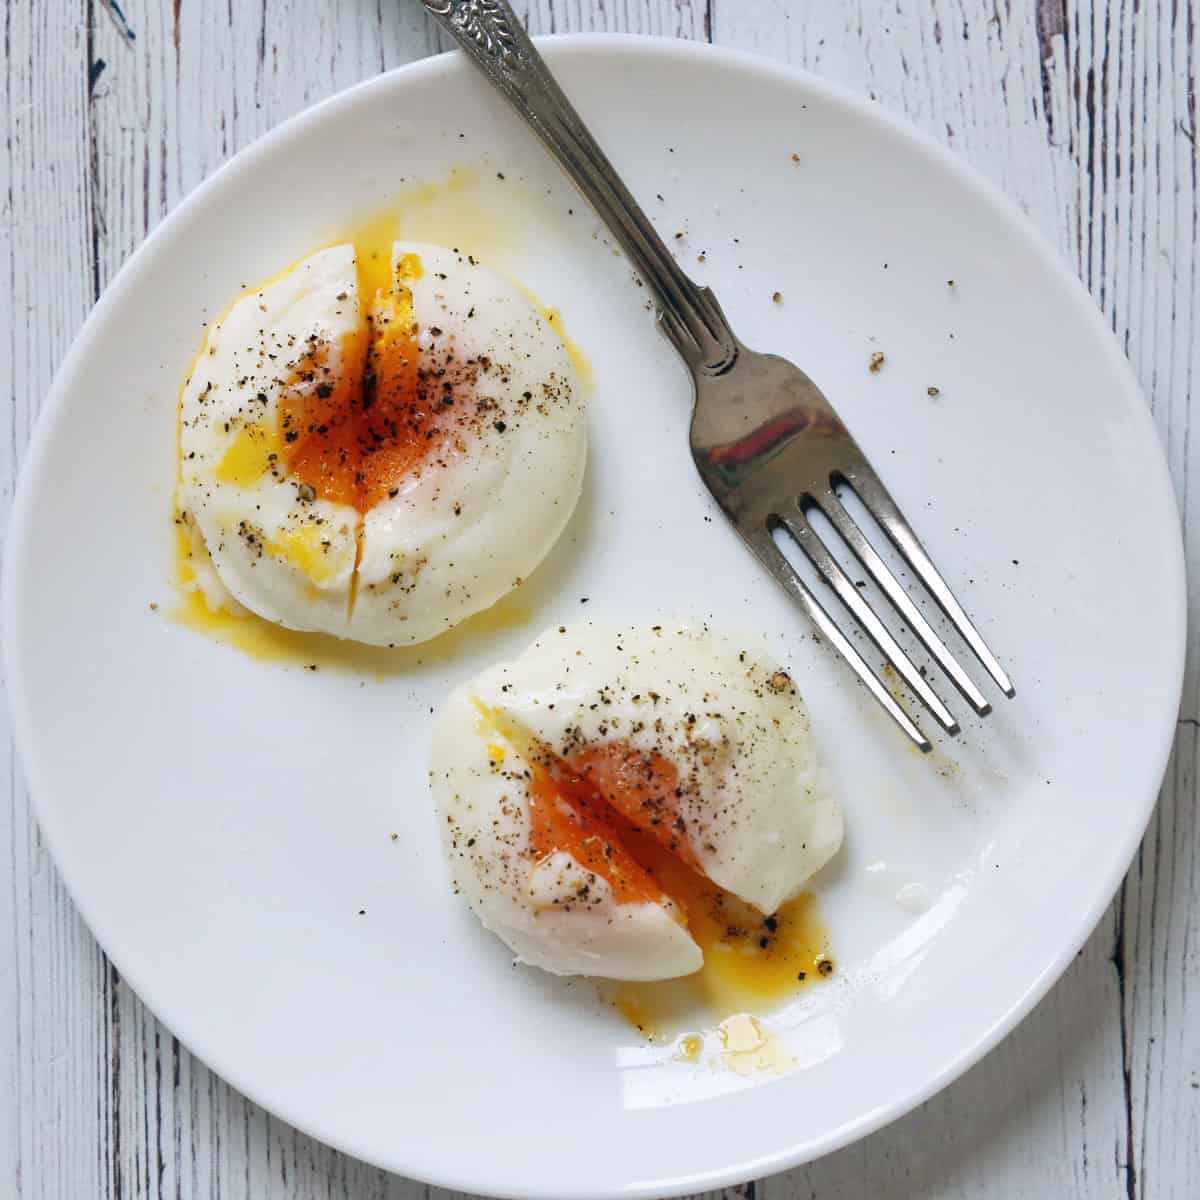 Two microwave-poached eggs on a plate.